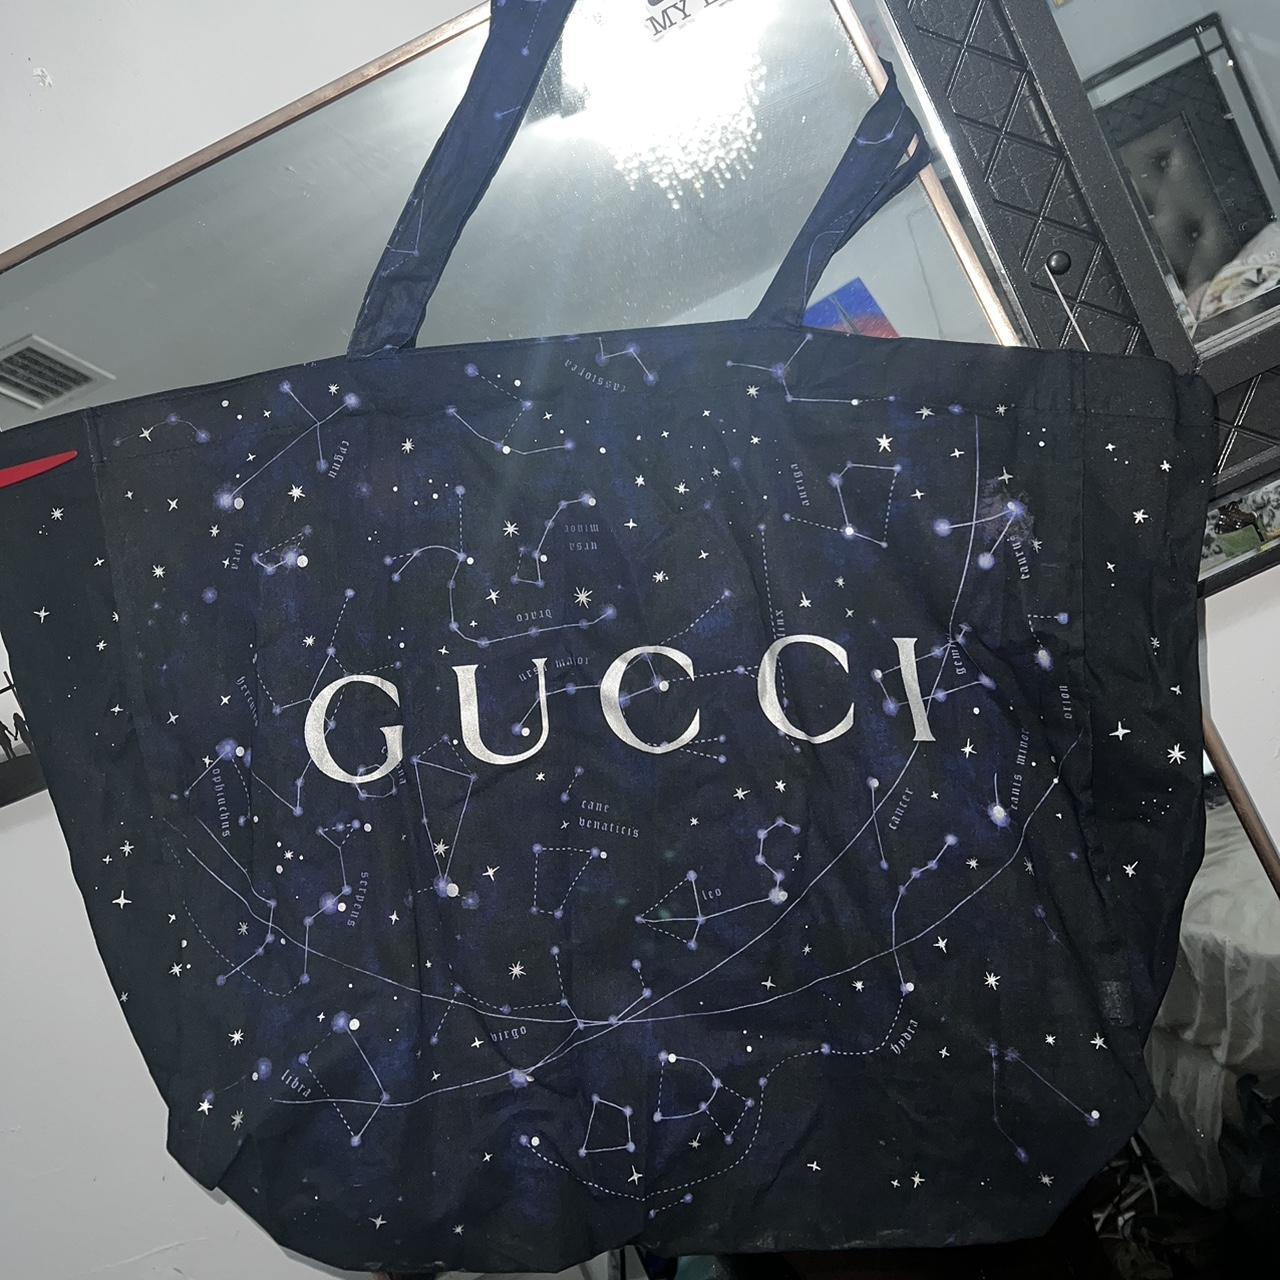 Vintage Gucci Tote Bag FREE SHIPPING • Outside - Depop